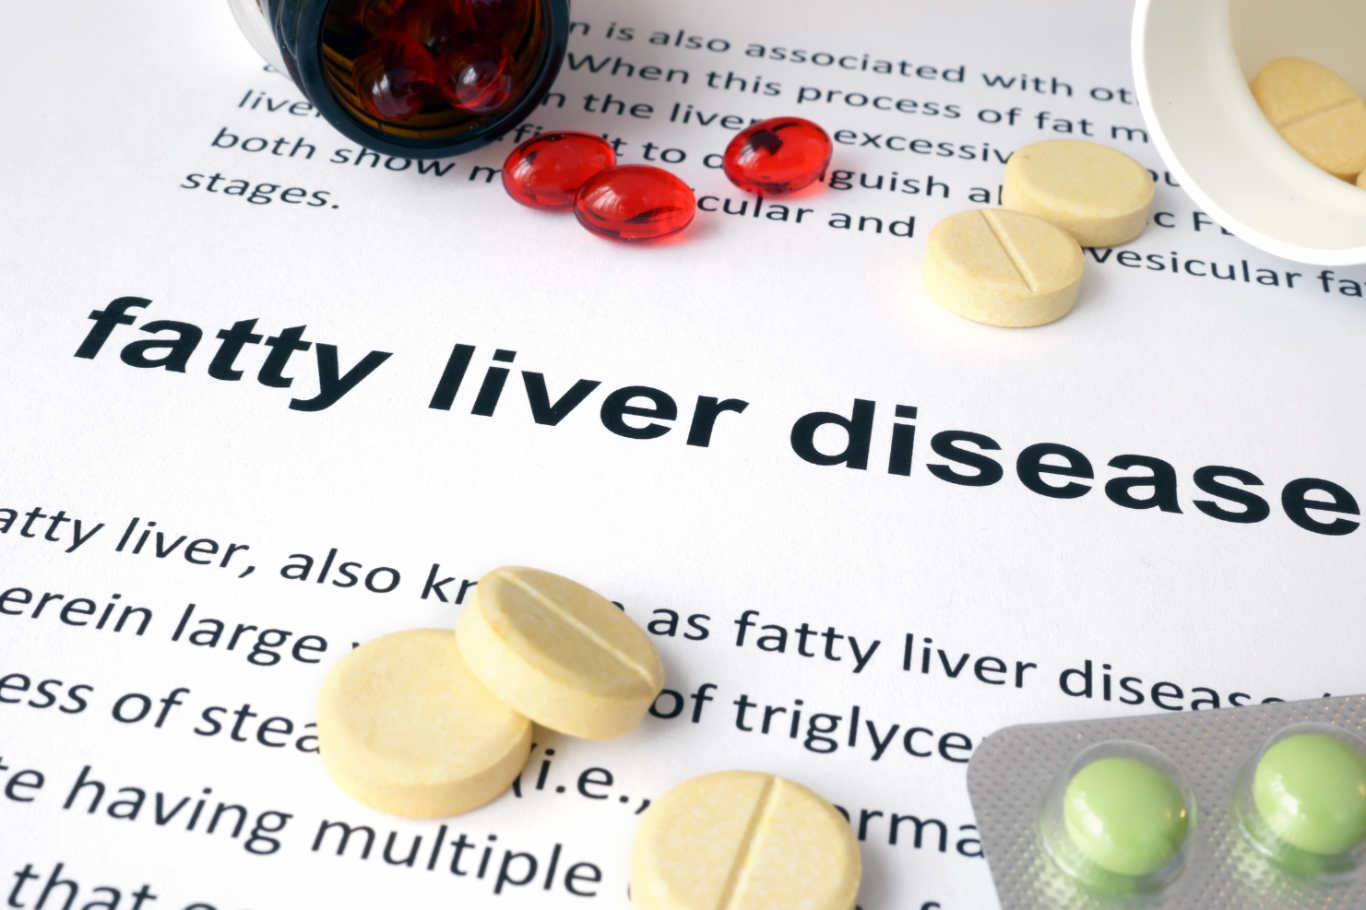 11 Facts About Fatty Liver Disease